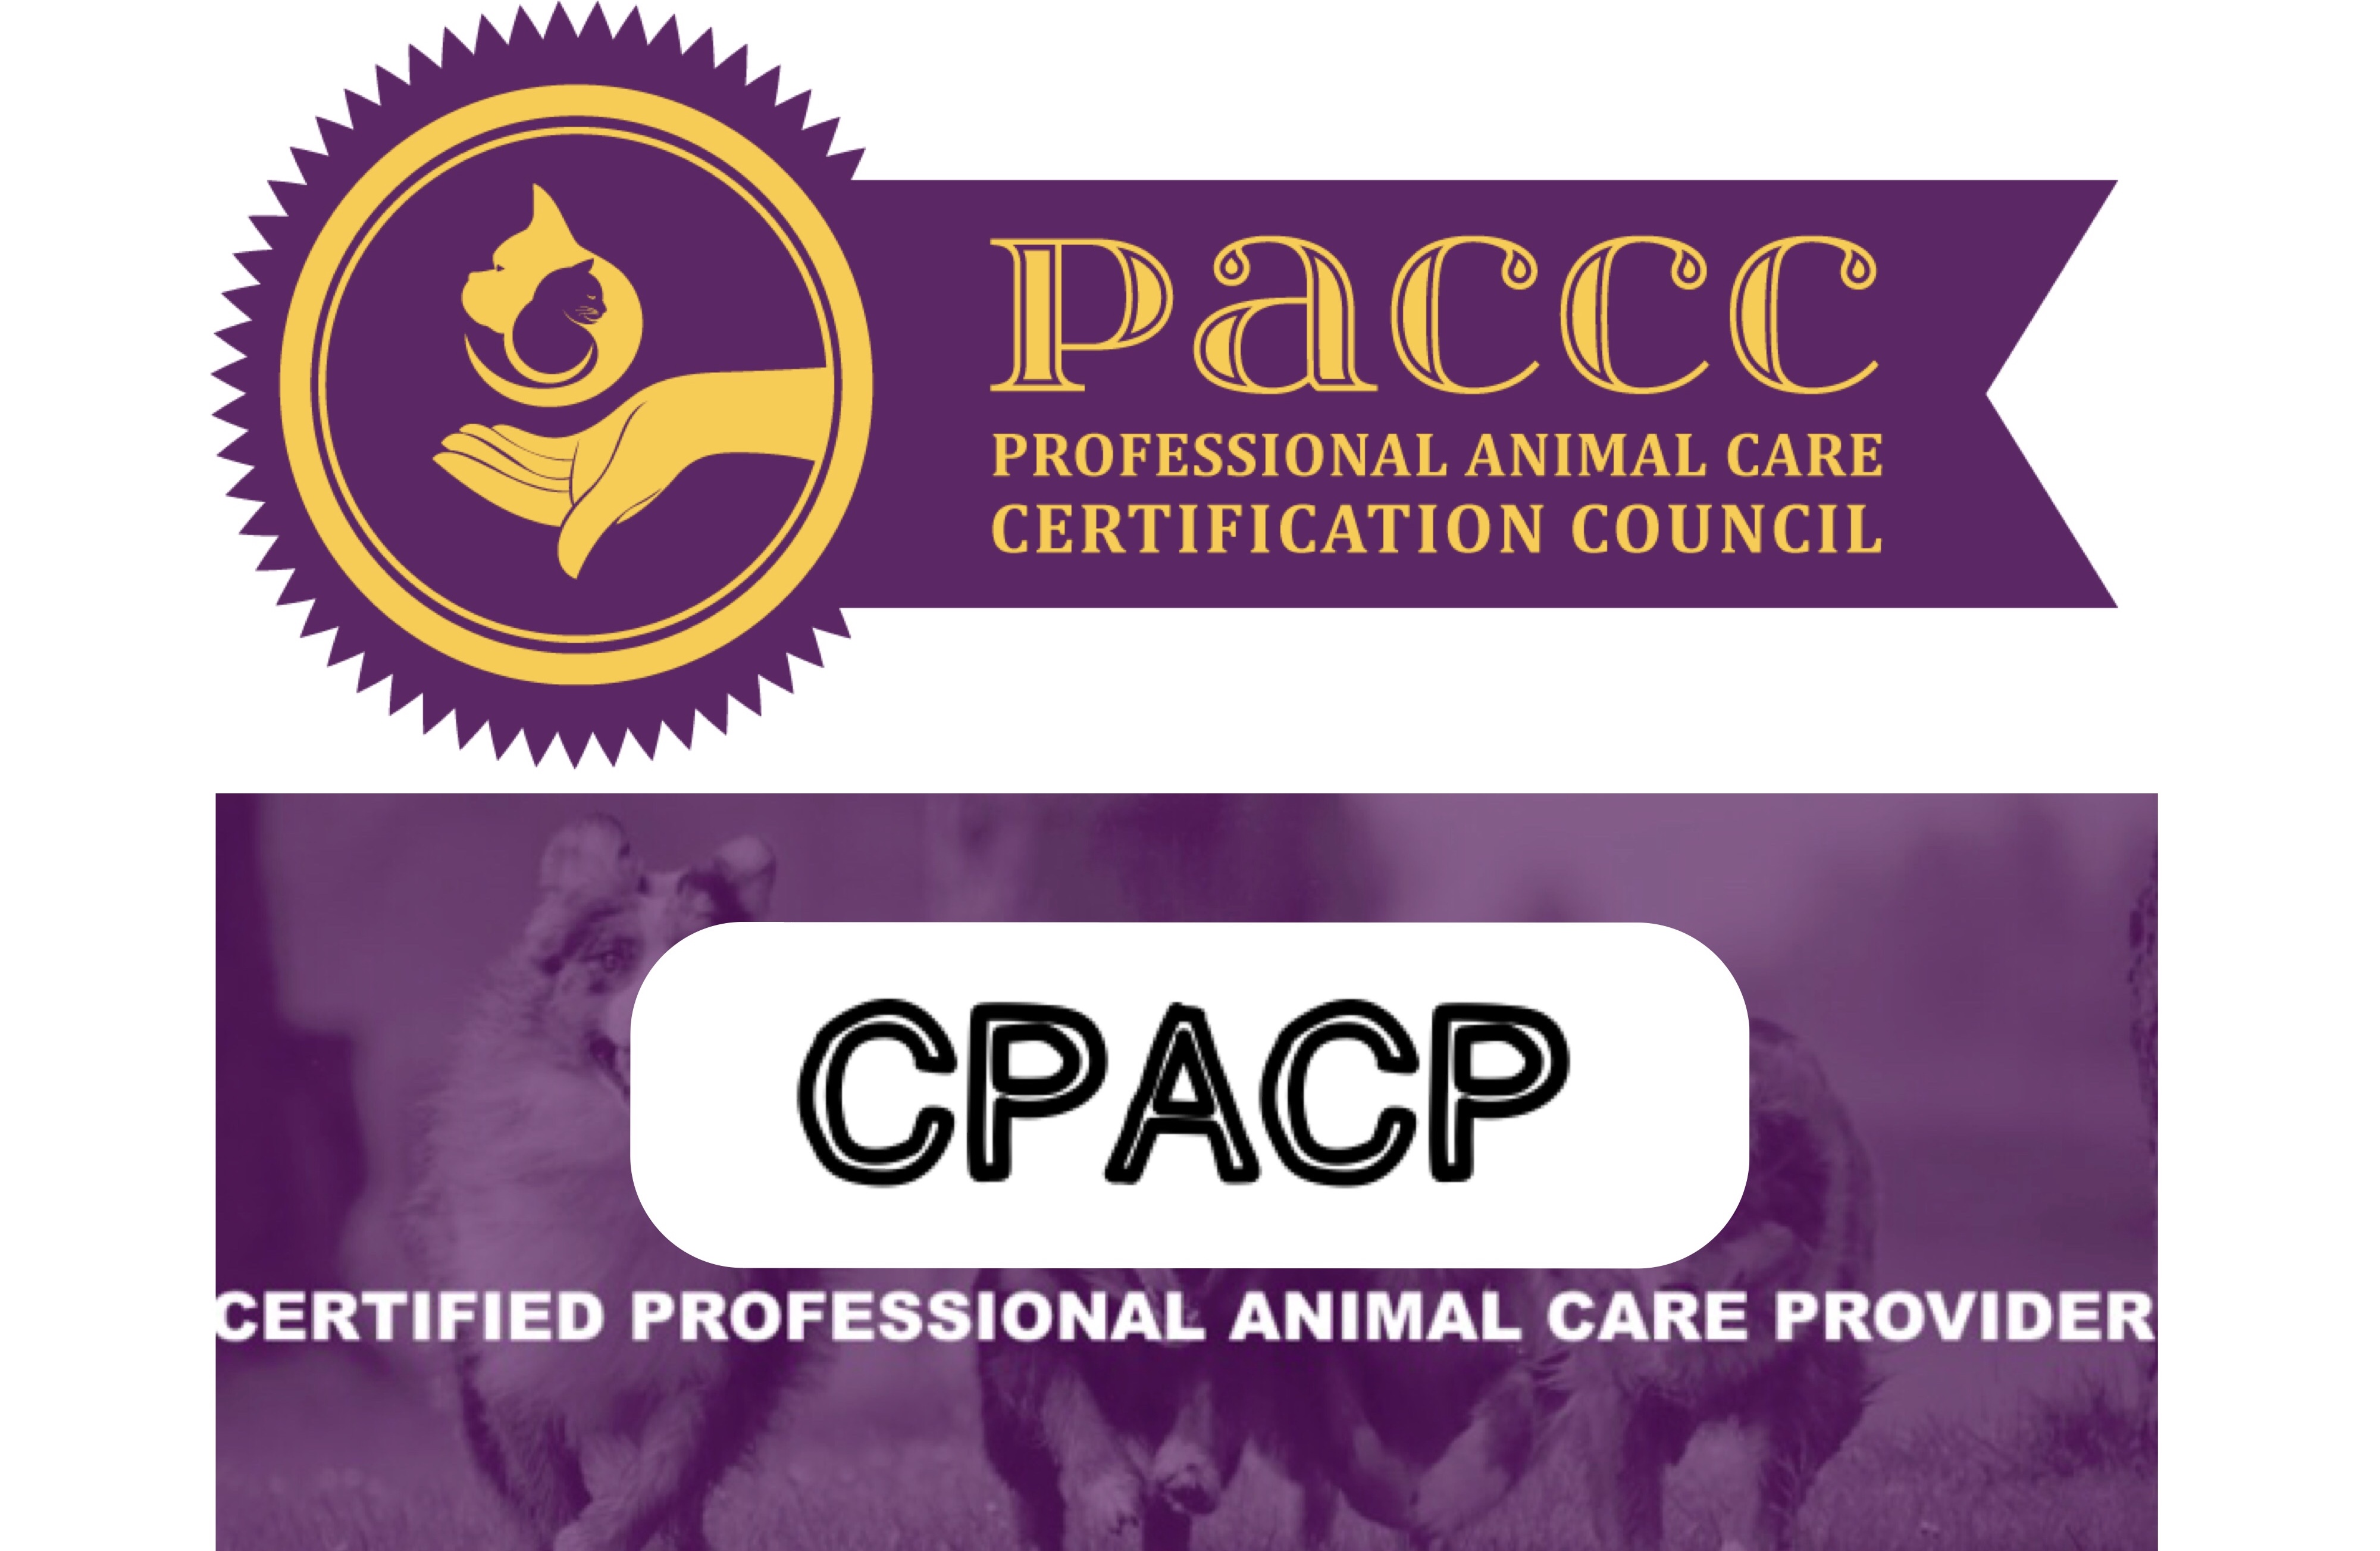 Certified Professional Animal Care Provider